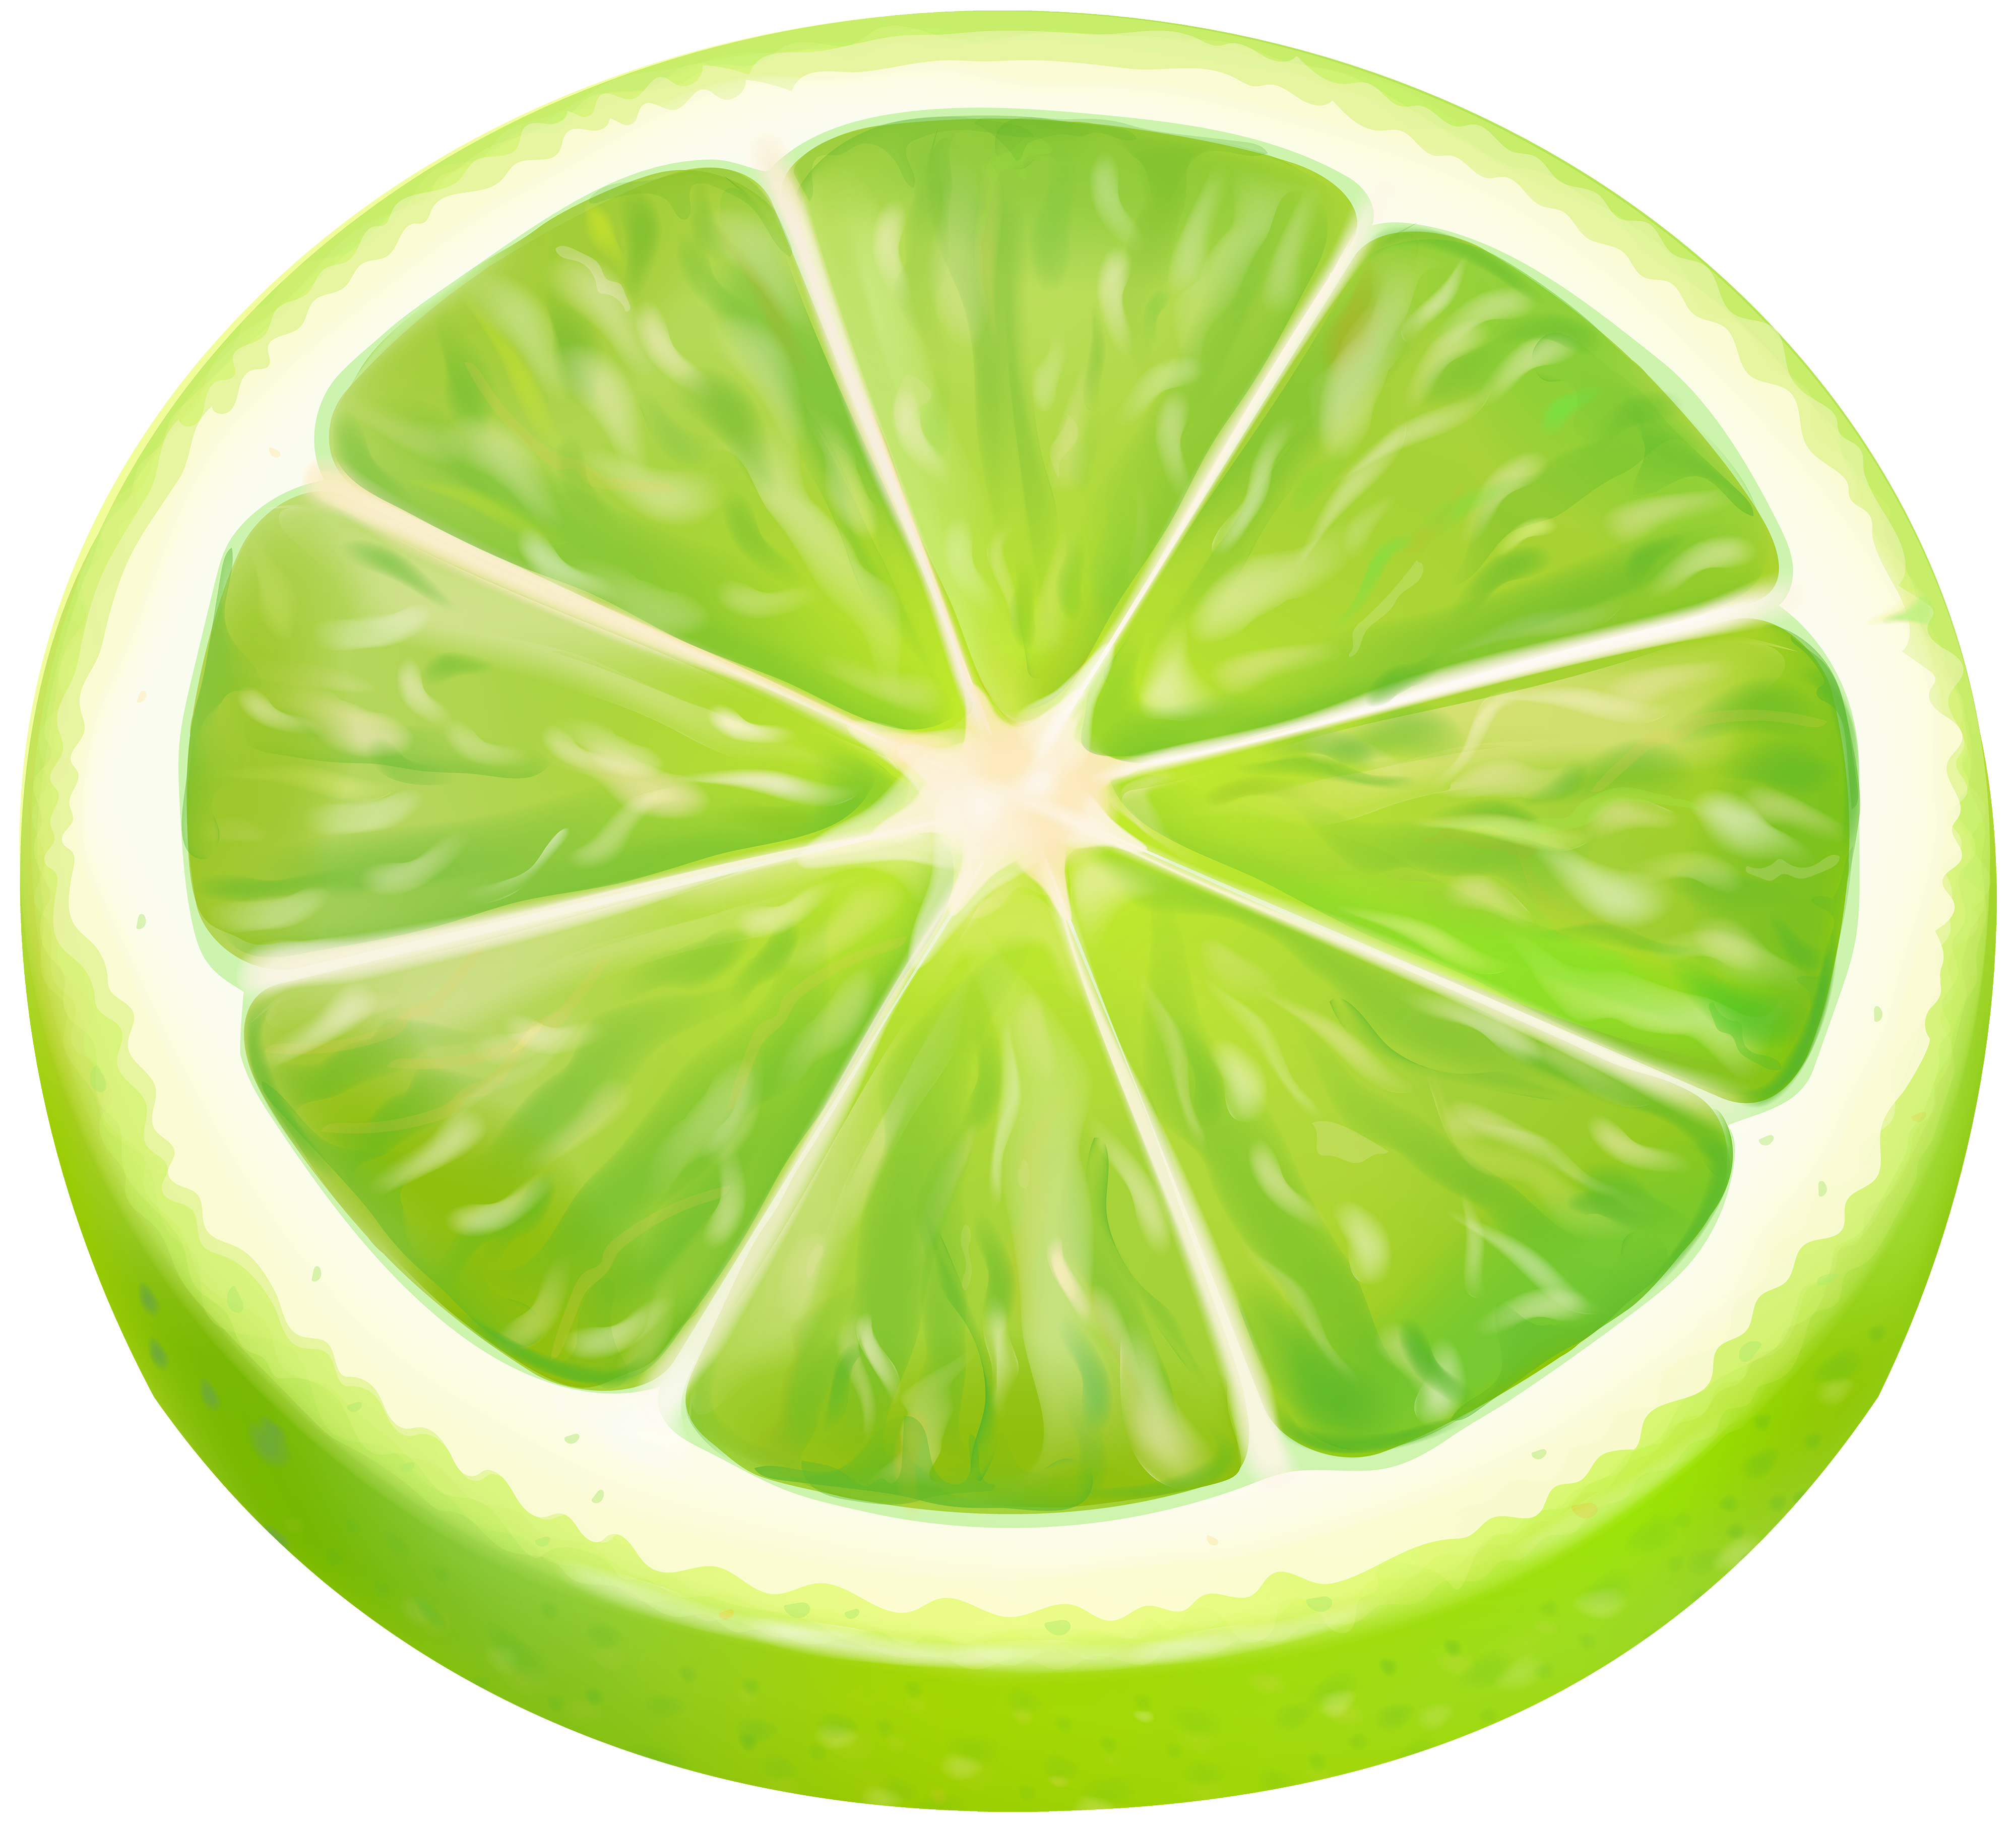 Lime clipart key lime. Transparent image gallery yopriceville